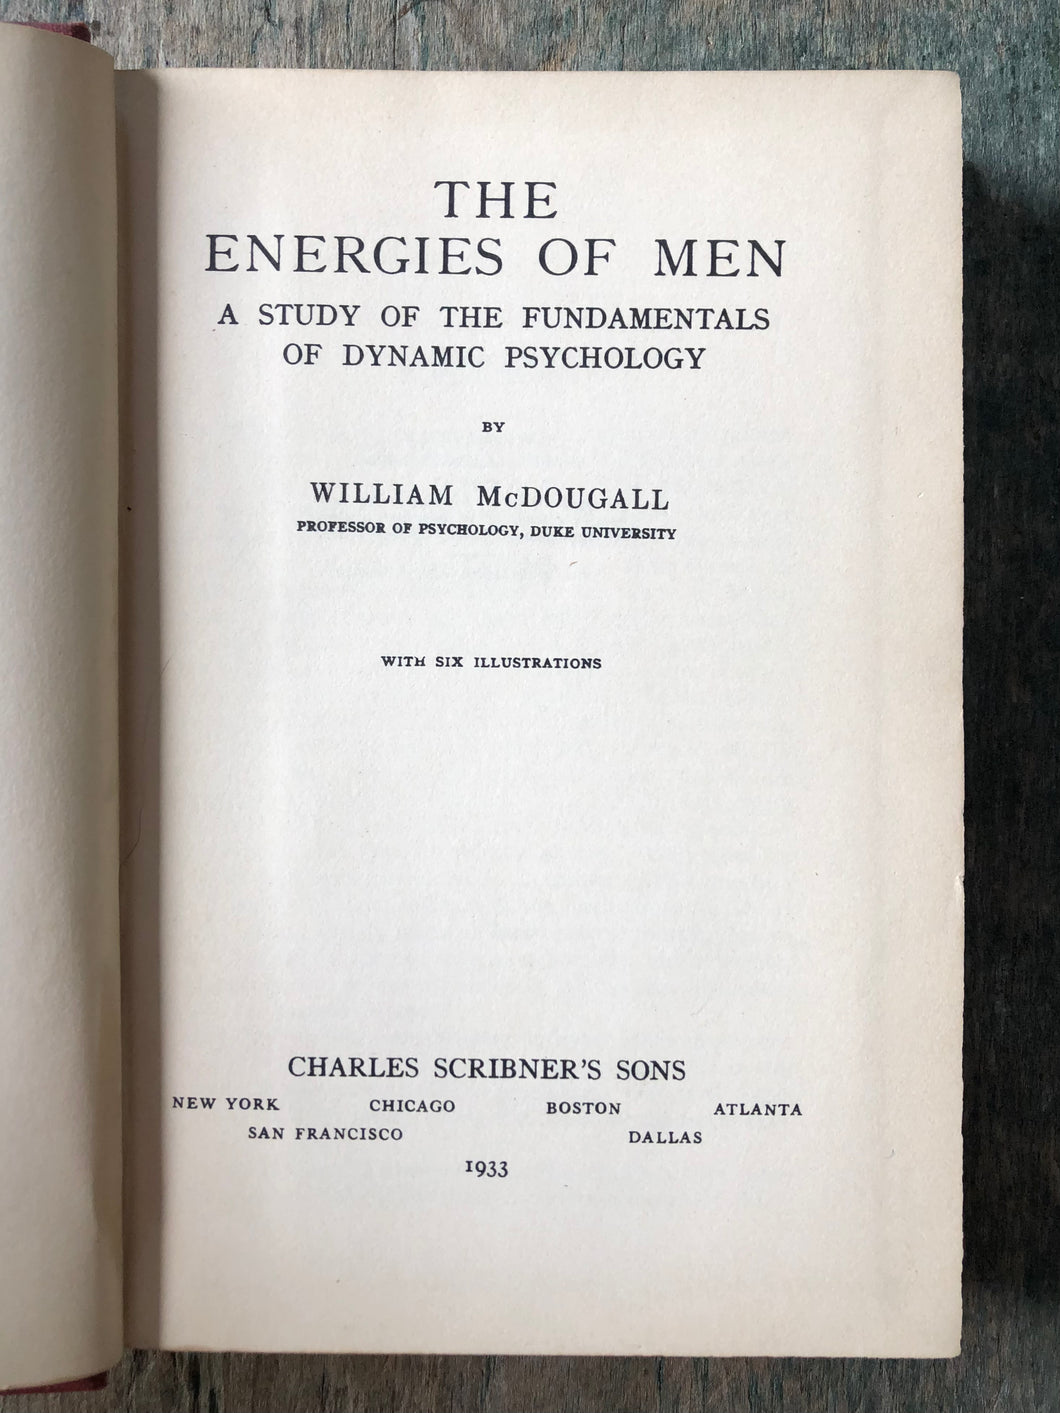 The Energies of Men: A Study of the Fundamentals of Dynamic Psychology by William McDougall